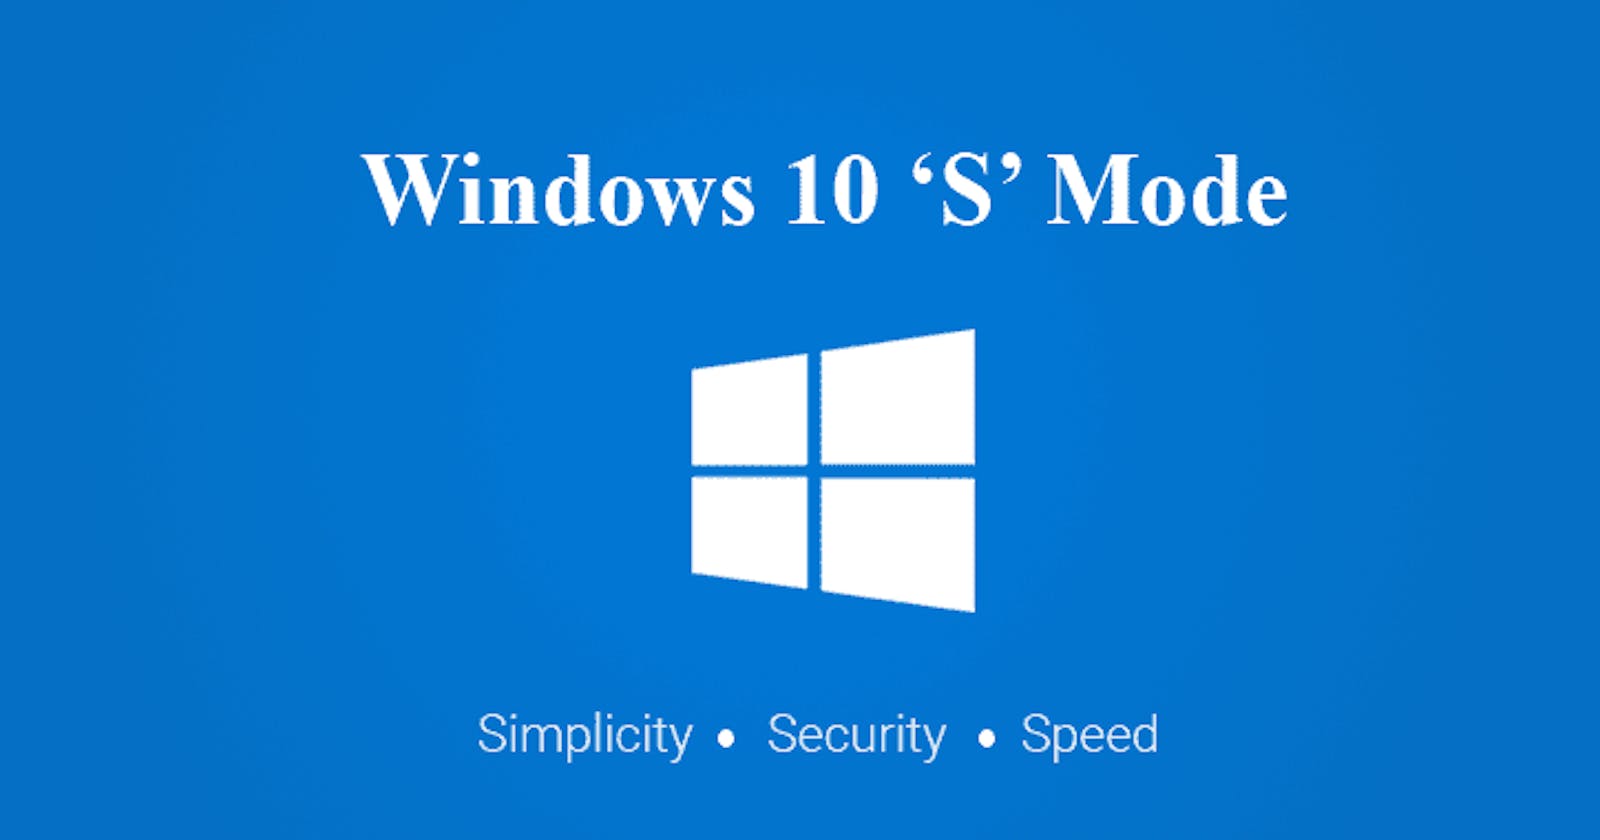 A Quick Look at Windows 10 "S" Mode